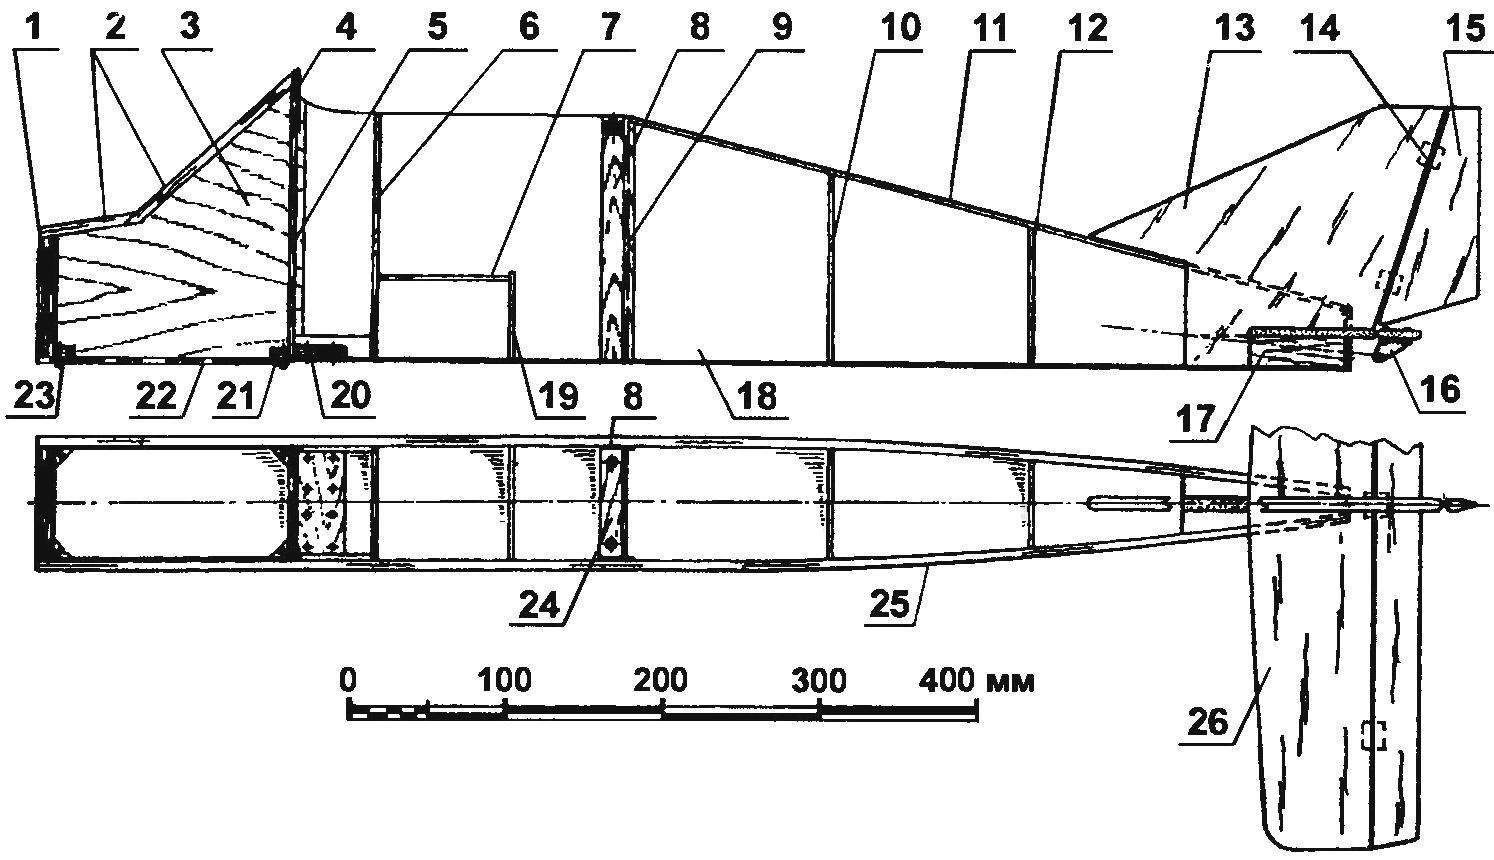 The fuselage of the model